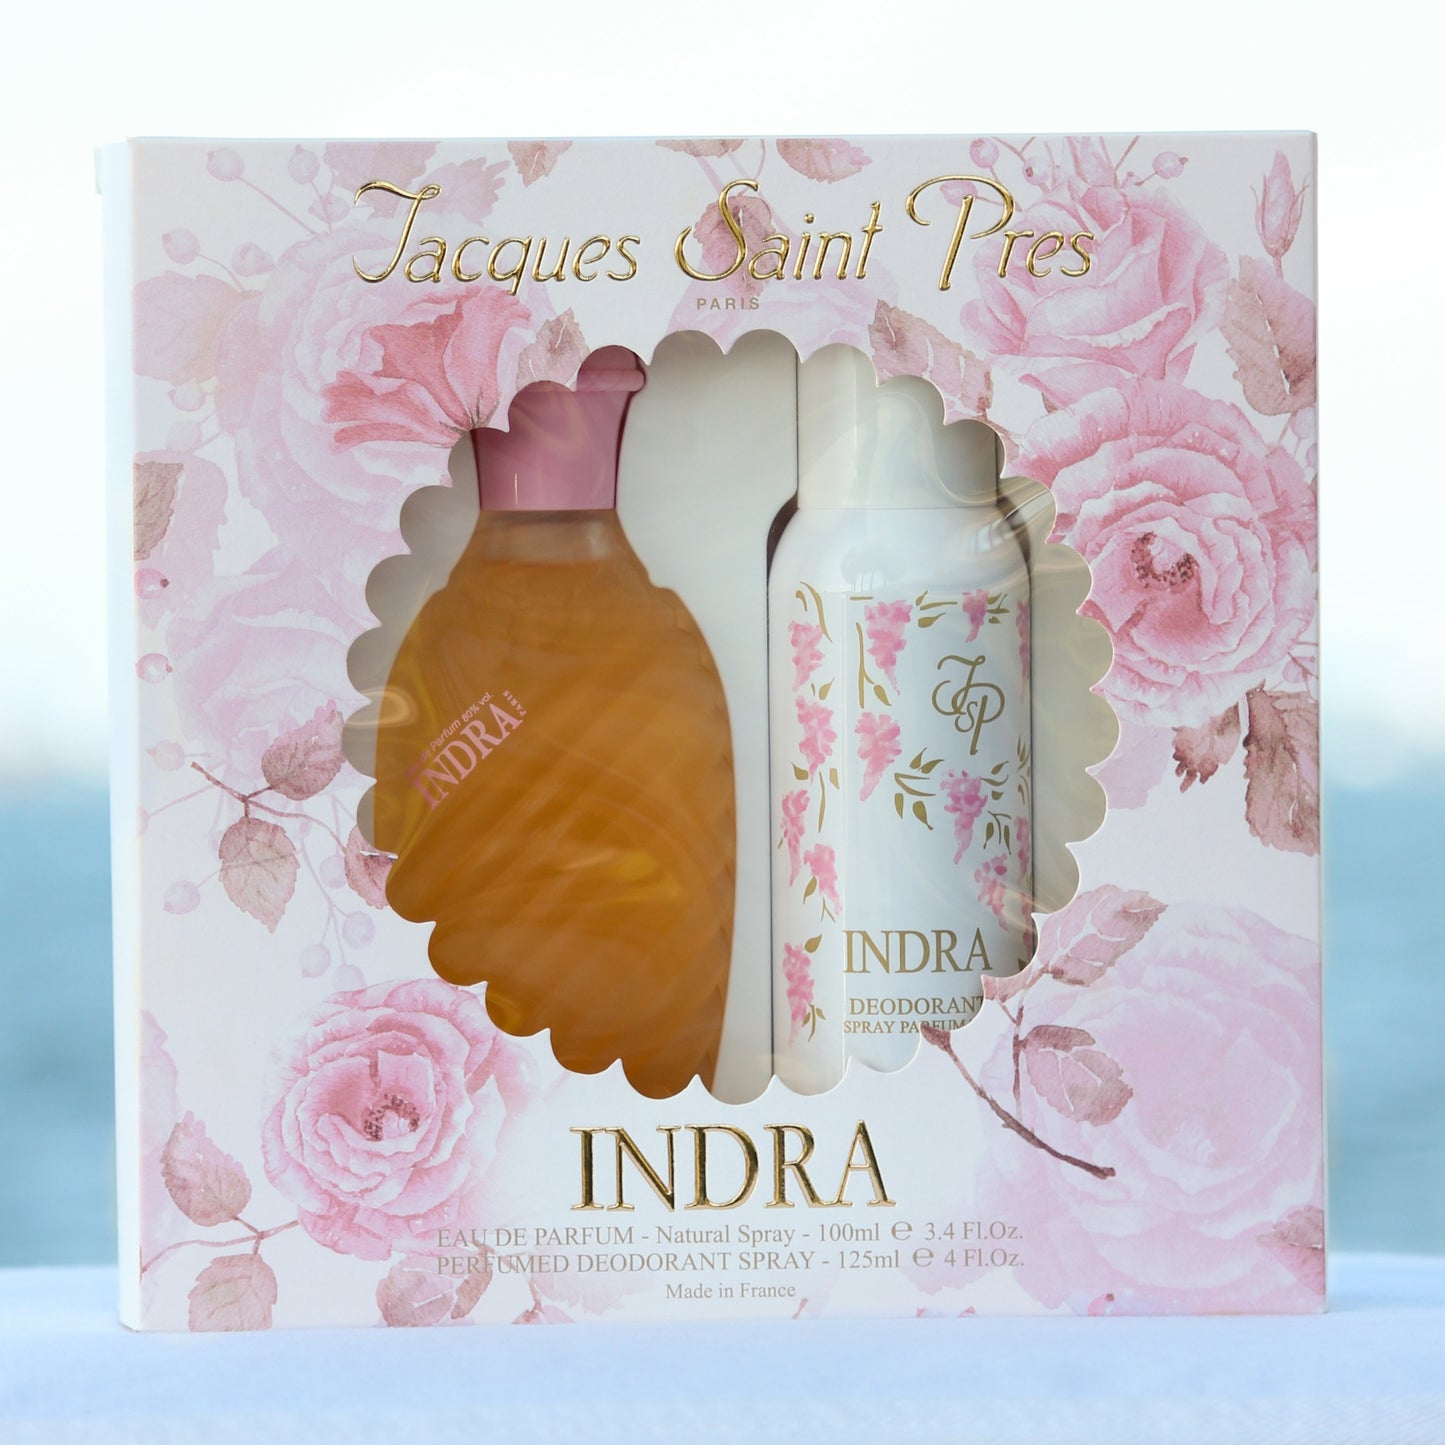 Jacques Saint Pres Indra Gift Set women's perfume 3.4 EDP and deodorant spray 4 oz in front of beach